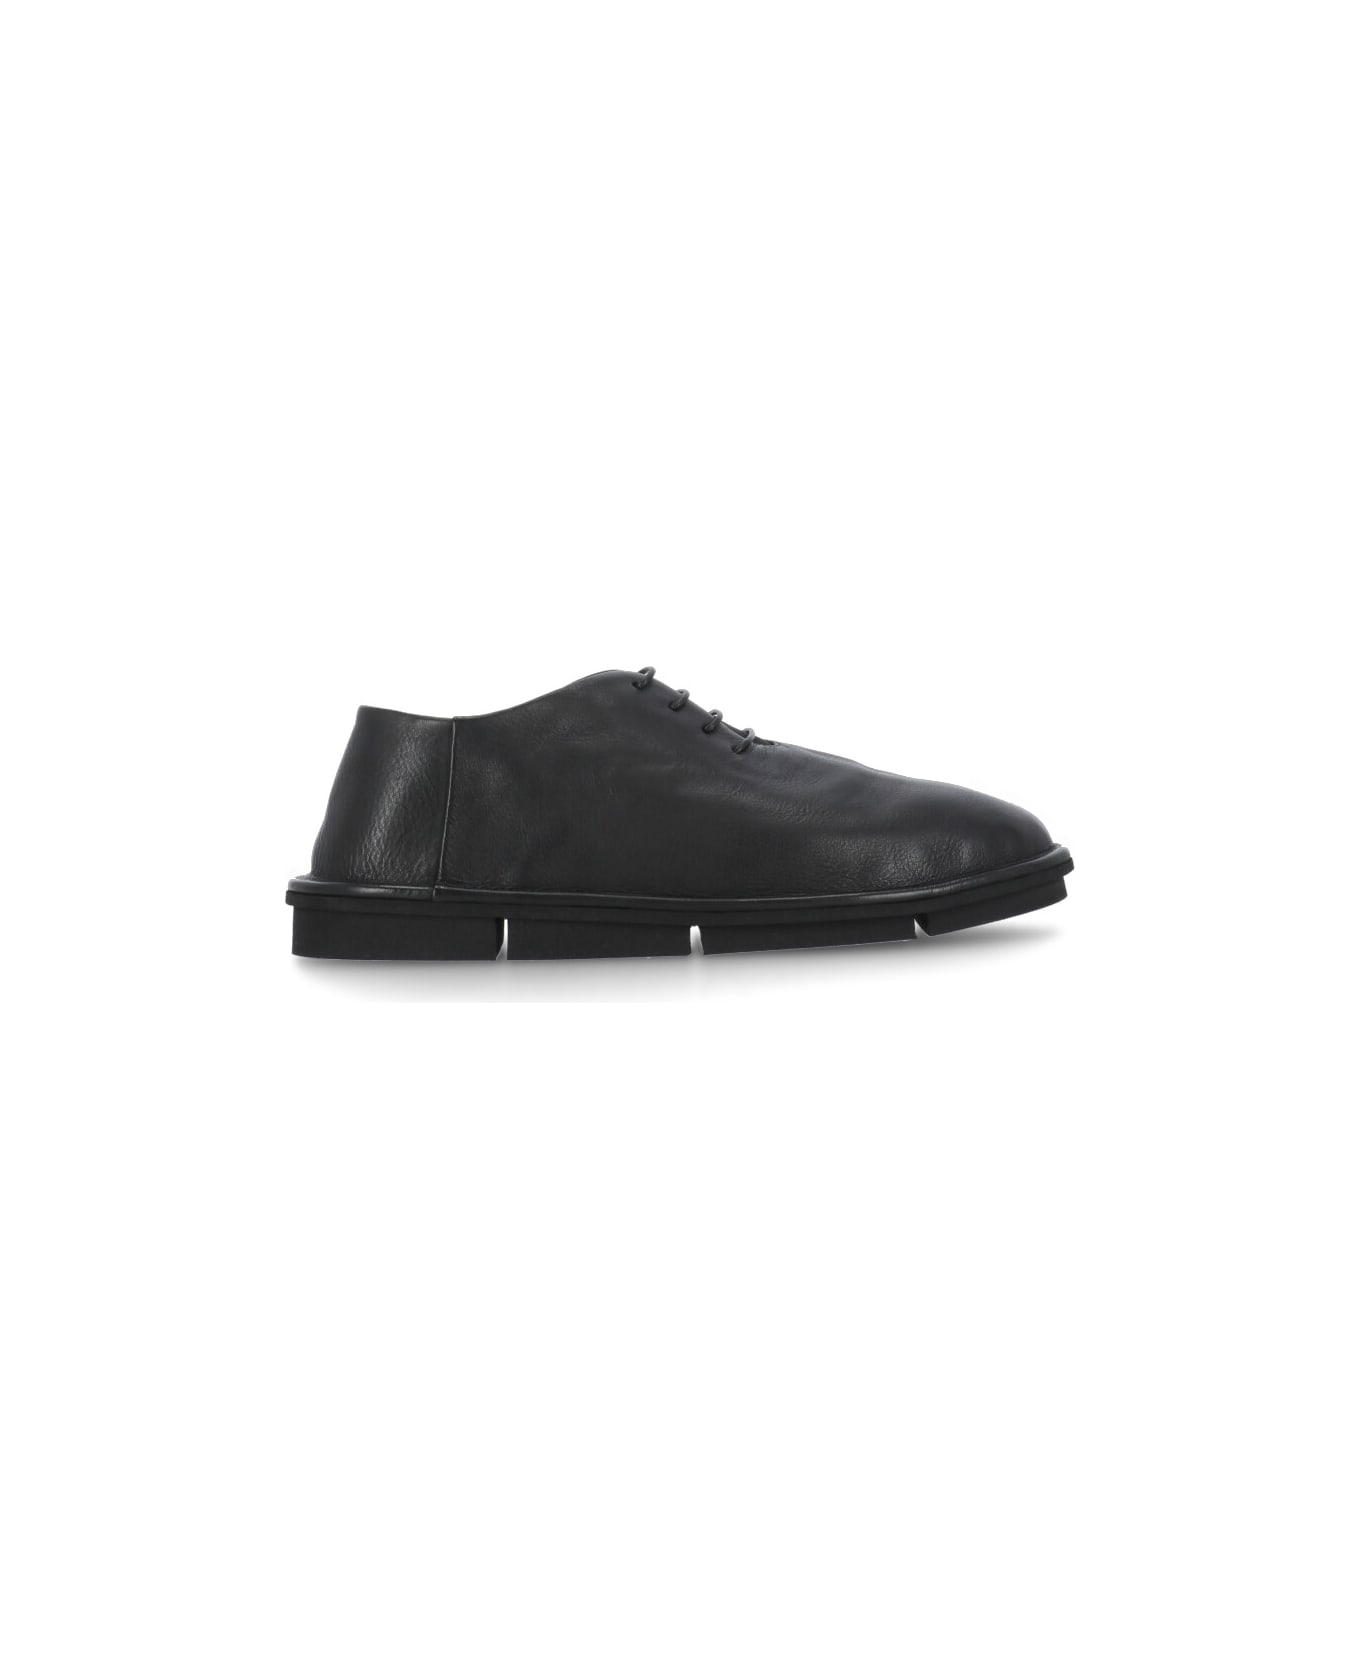 Marsell Isolatte Lace Up Shoes - Black